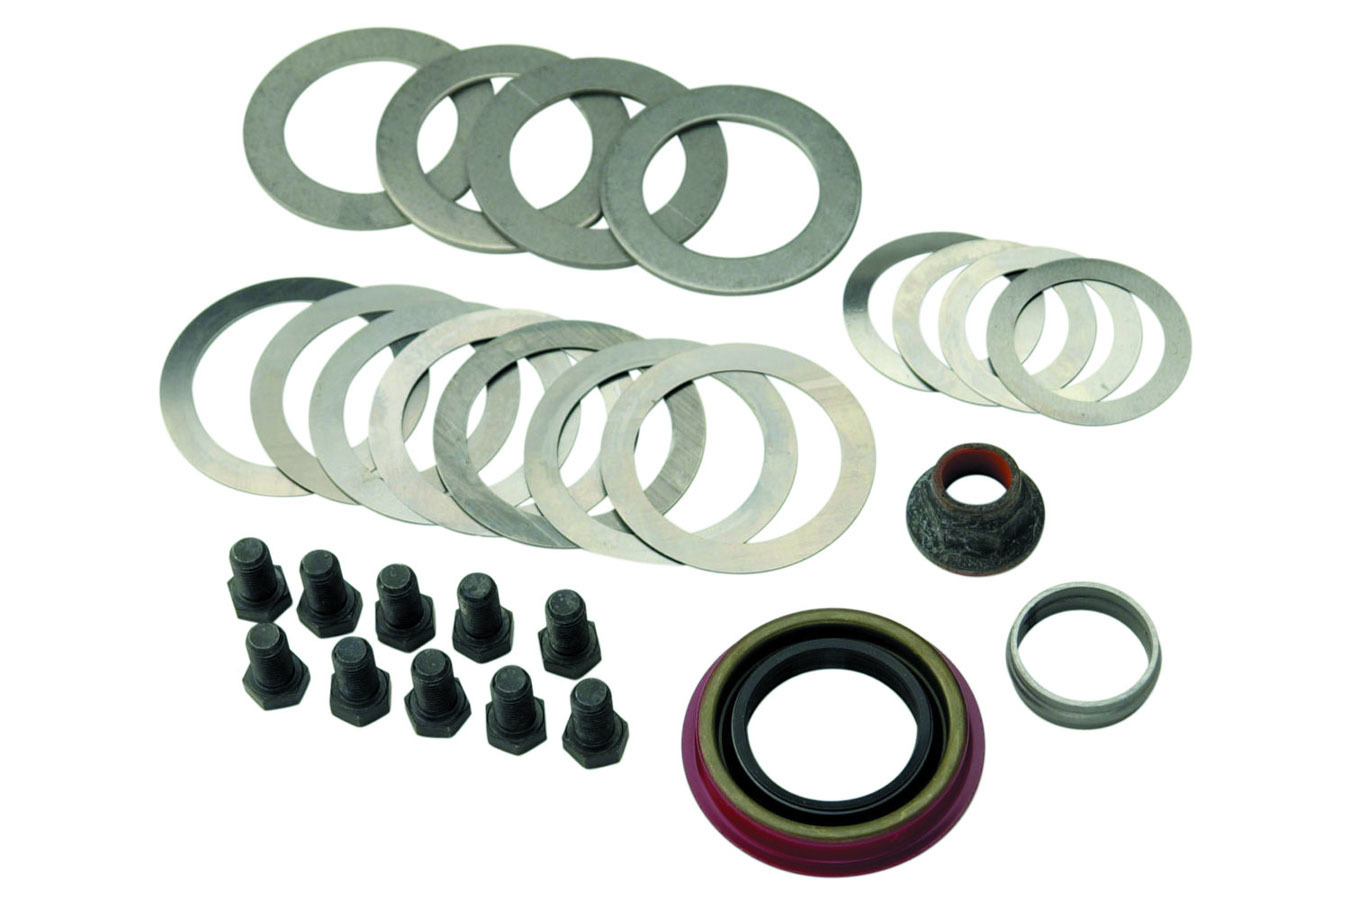 Ford Performance M4210-A Differential Installation Kit, Crush Sleeve / Hardware / Seals / Shims, Ford 8.8 in, Kit